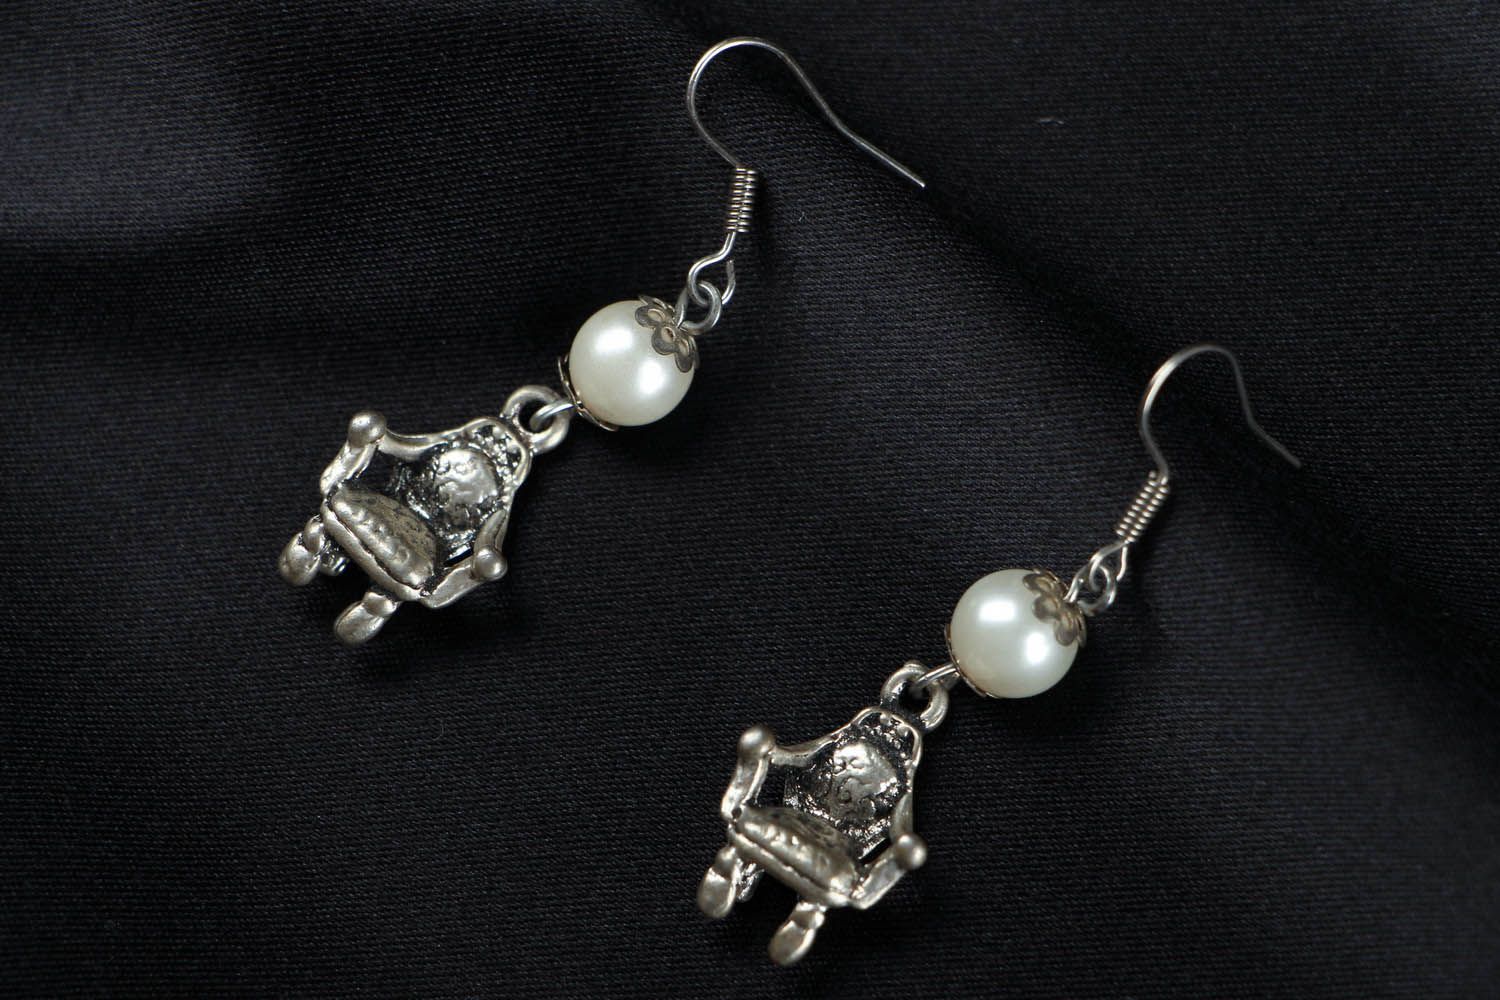 Earrings made of metal and beads Armchairs photo 1